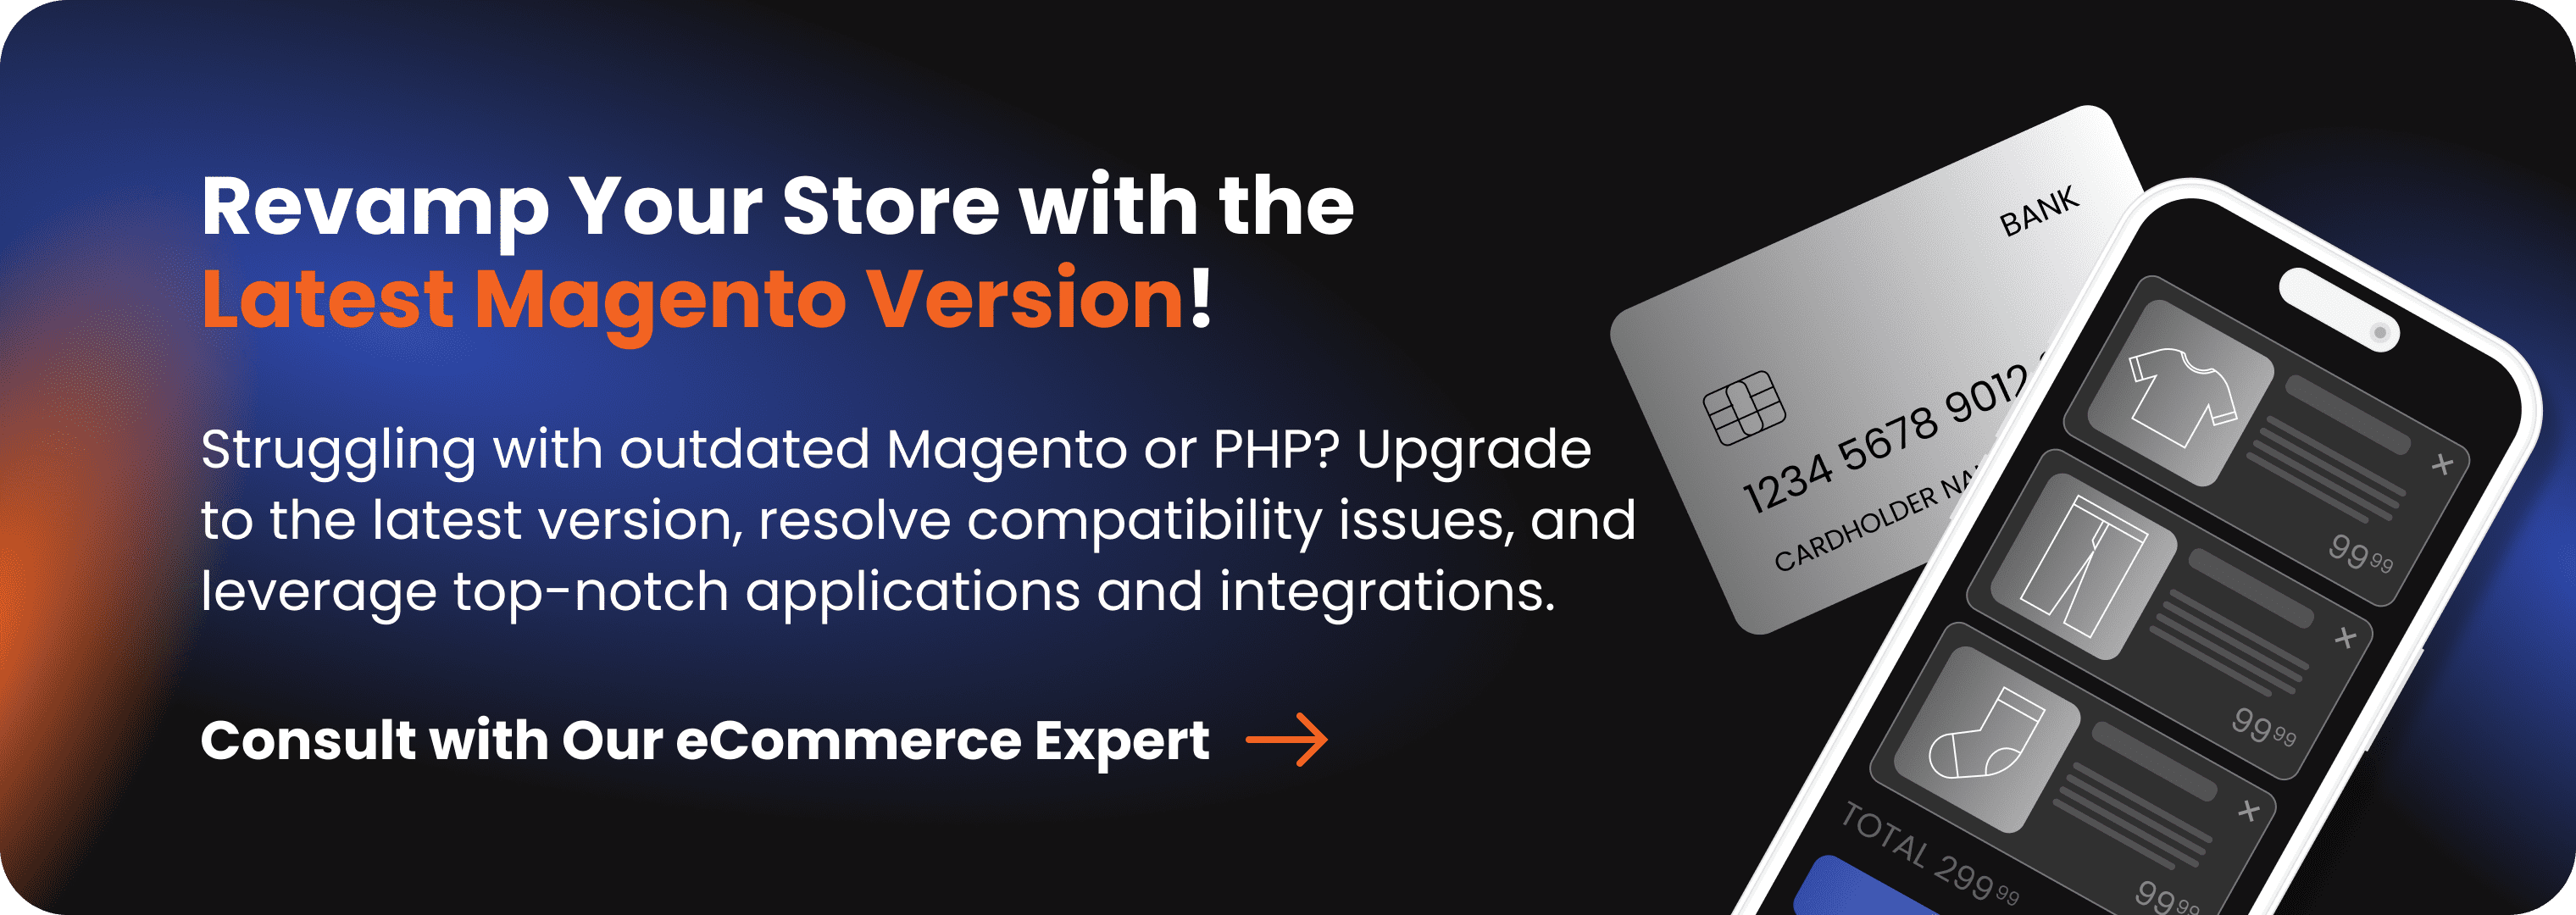 Migration - Revamp Your Store with the Latest Magento Version!